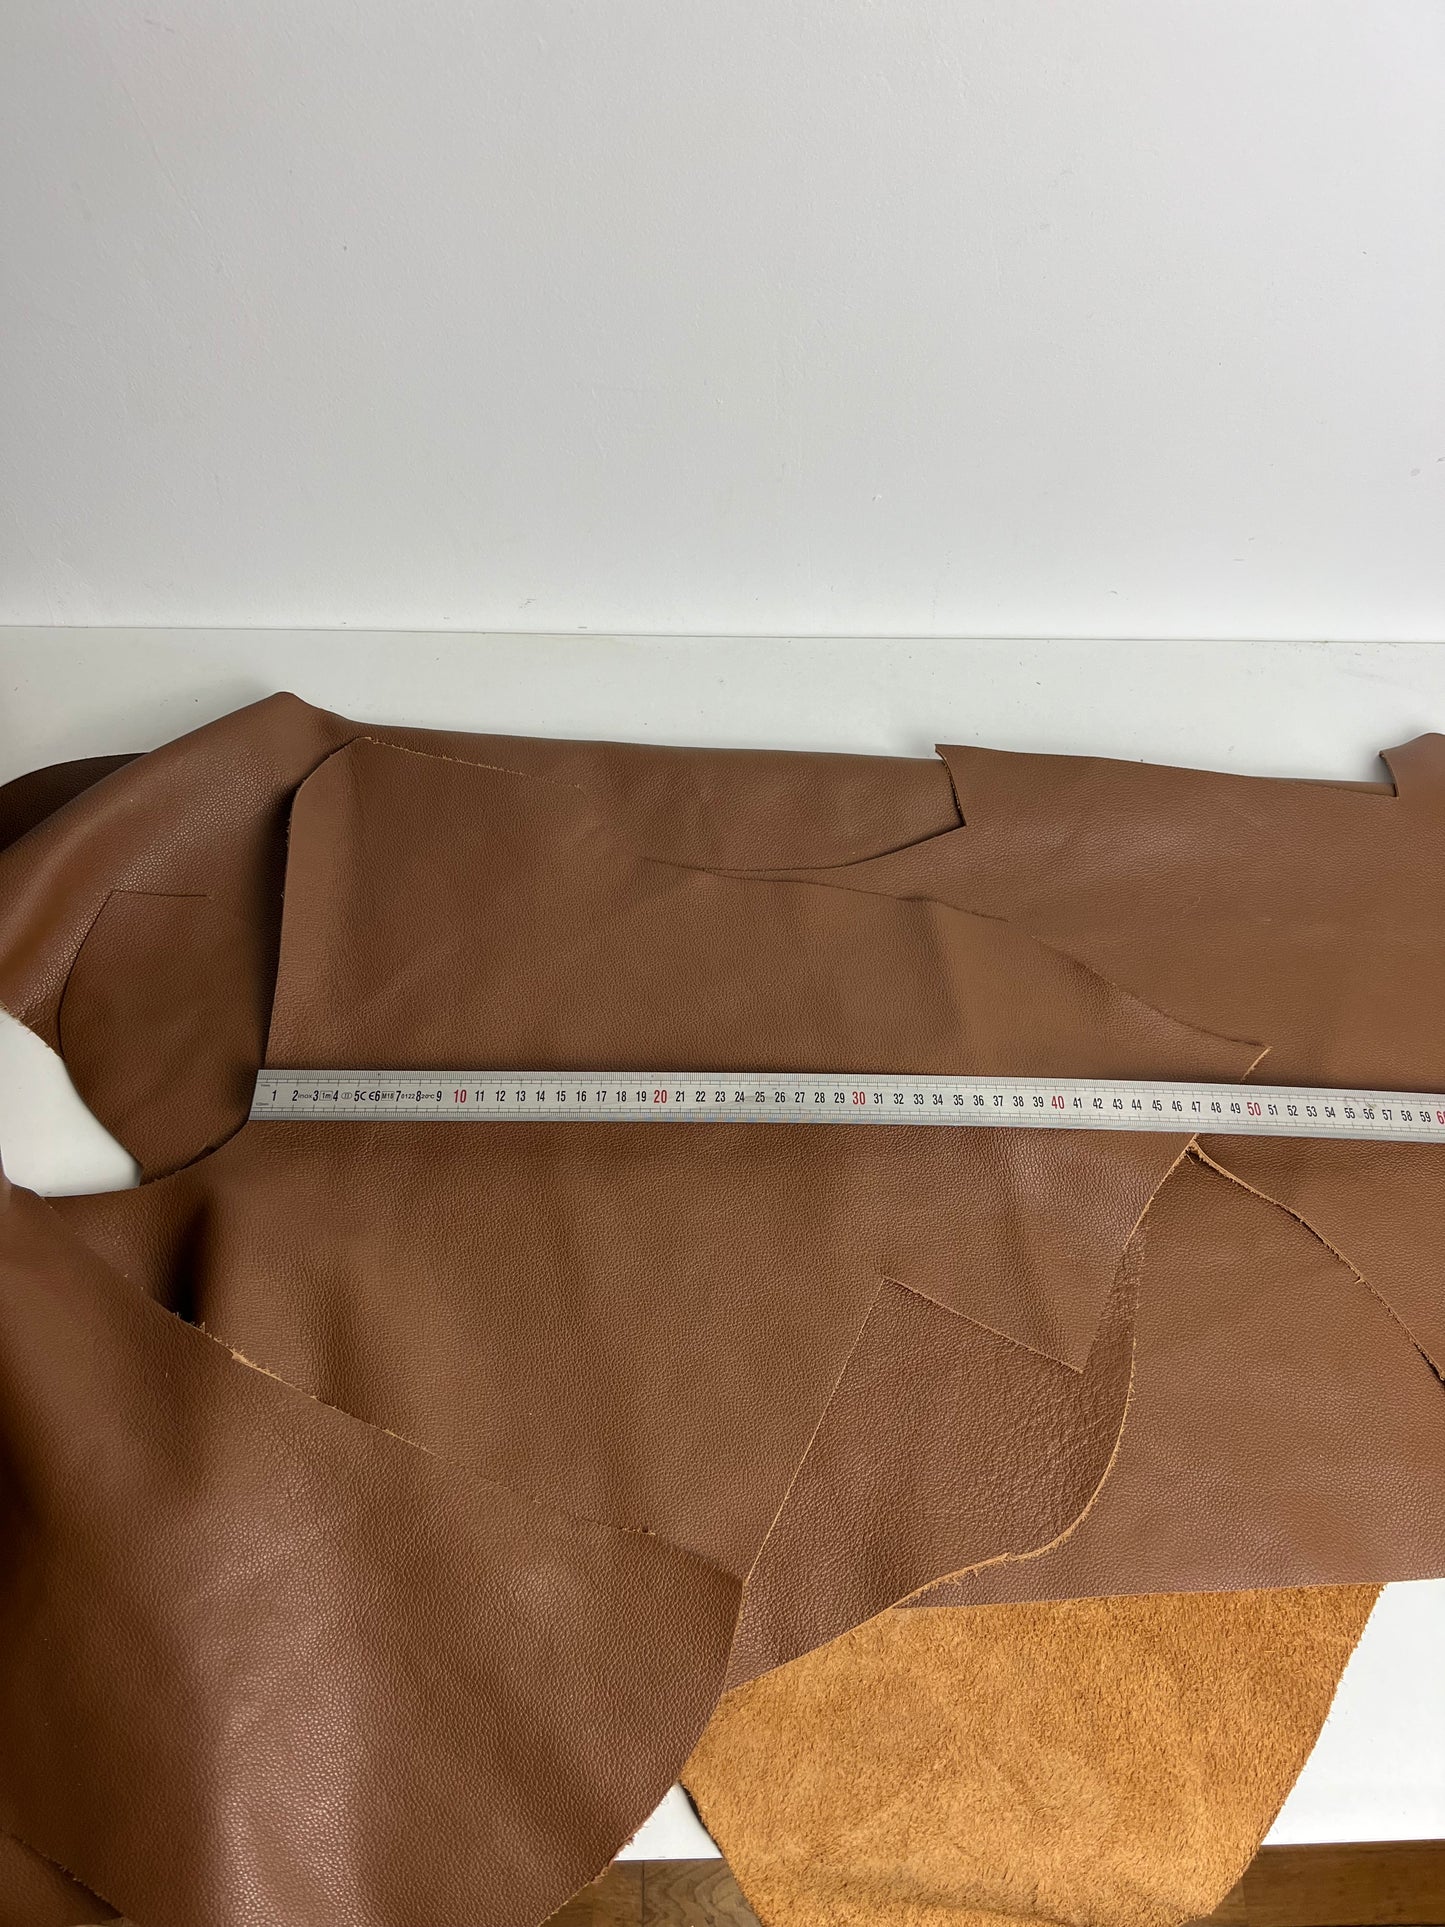 Pieces of Leather, Medium and Large pieces, Color Brown, Cow, Nice finish look | 0.8 kg  | 1.8 lb